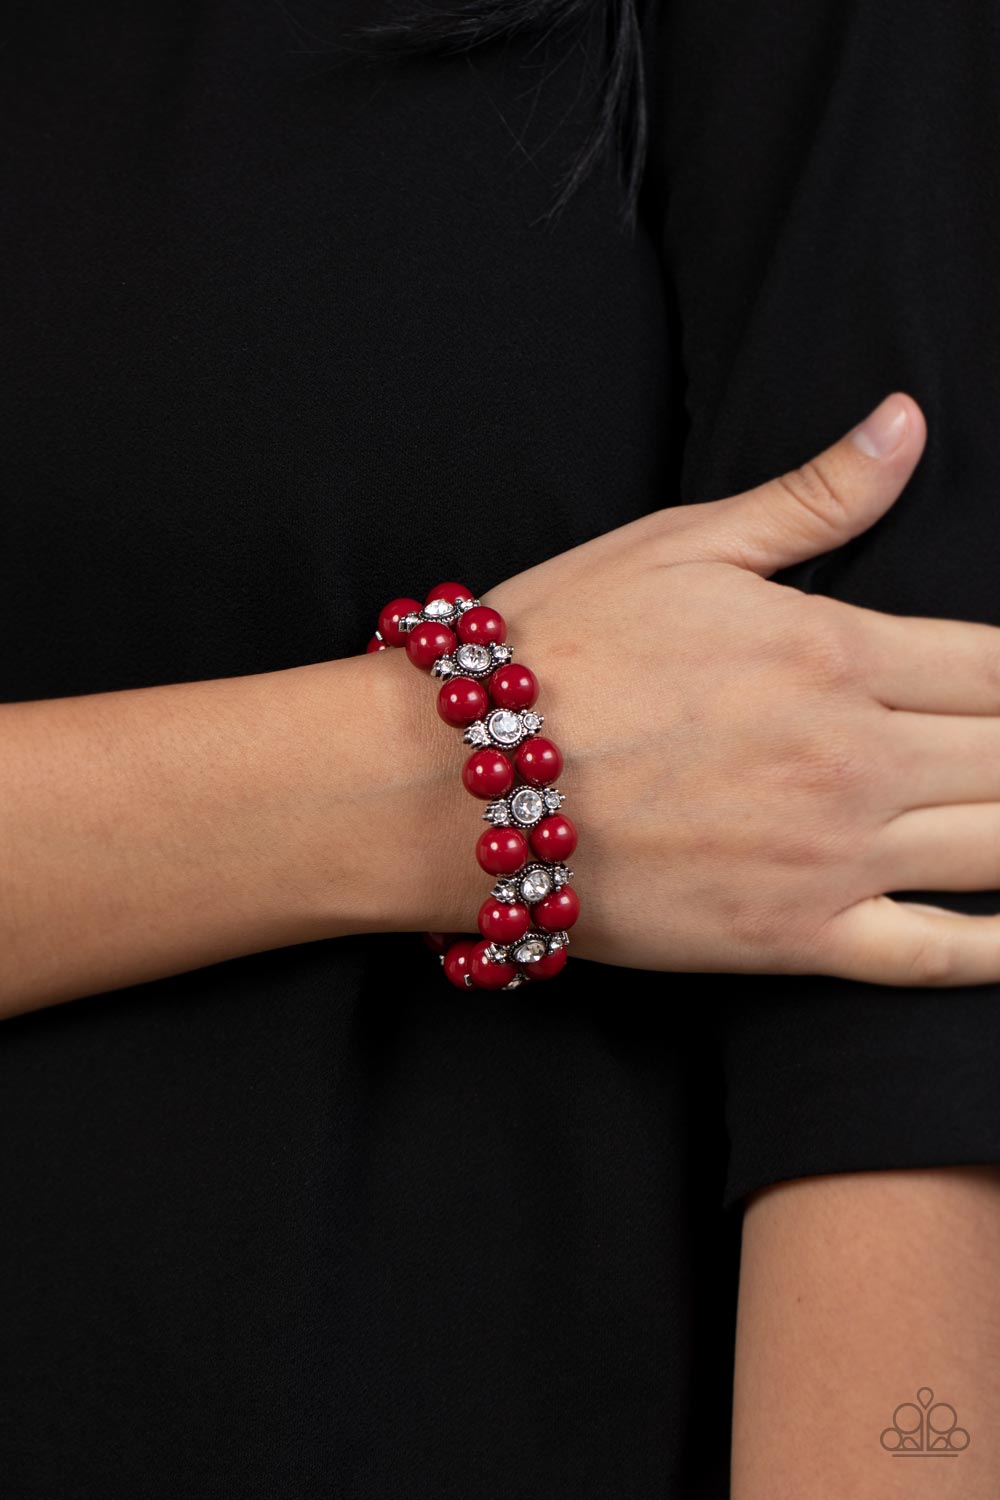 Starlight Reflection - Red Stretchy Fashion Bracelet - Paparazzi Accessories - Pairs of Fire Whirl beads join white rhinestone encrusted silver frames along stretchy bands around the wrist, resulting in a refined pop of color. Sold as one individual bracelet.